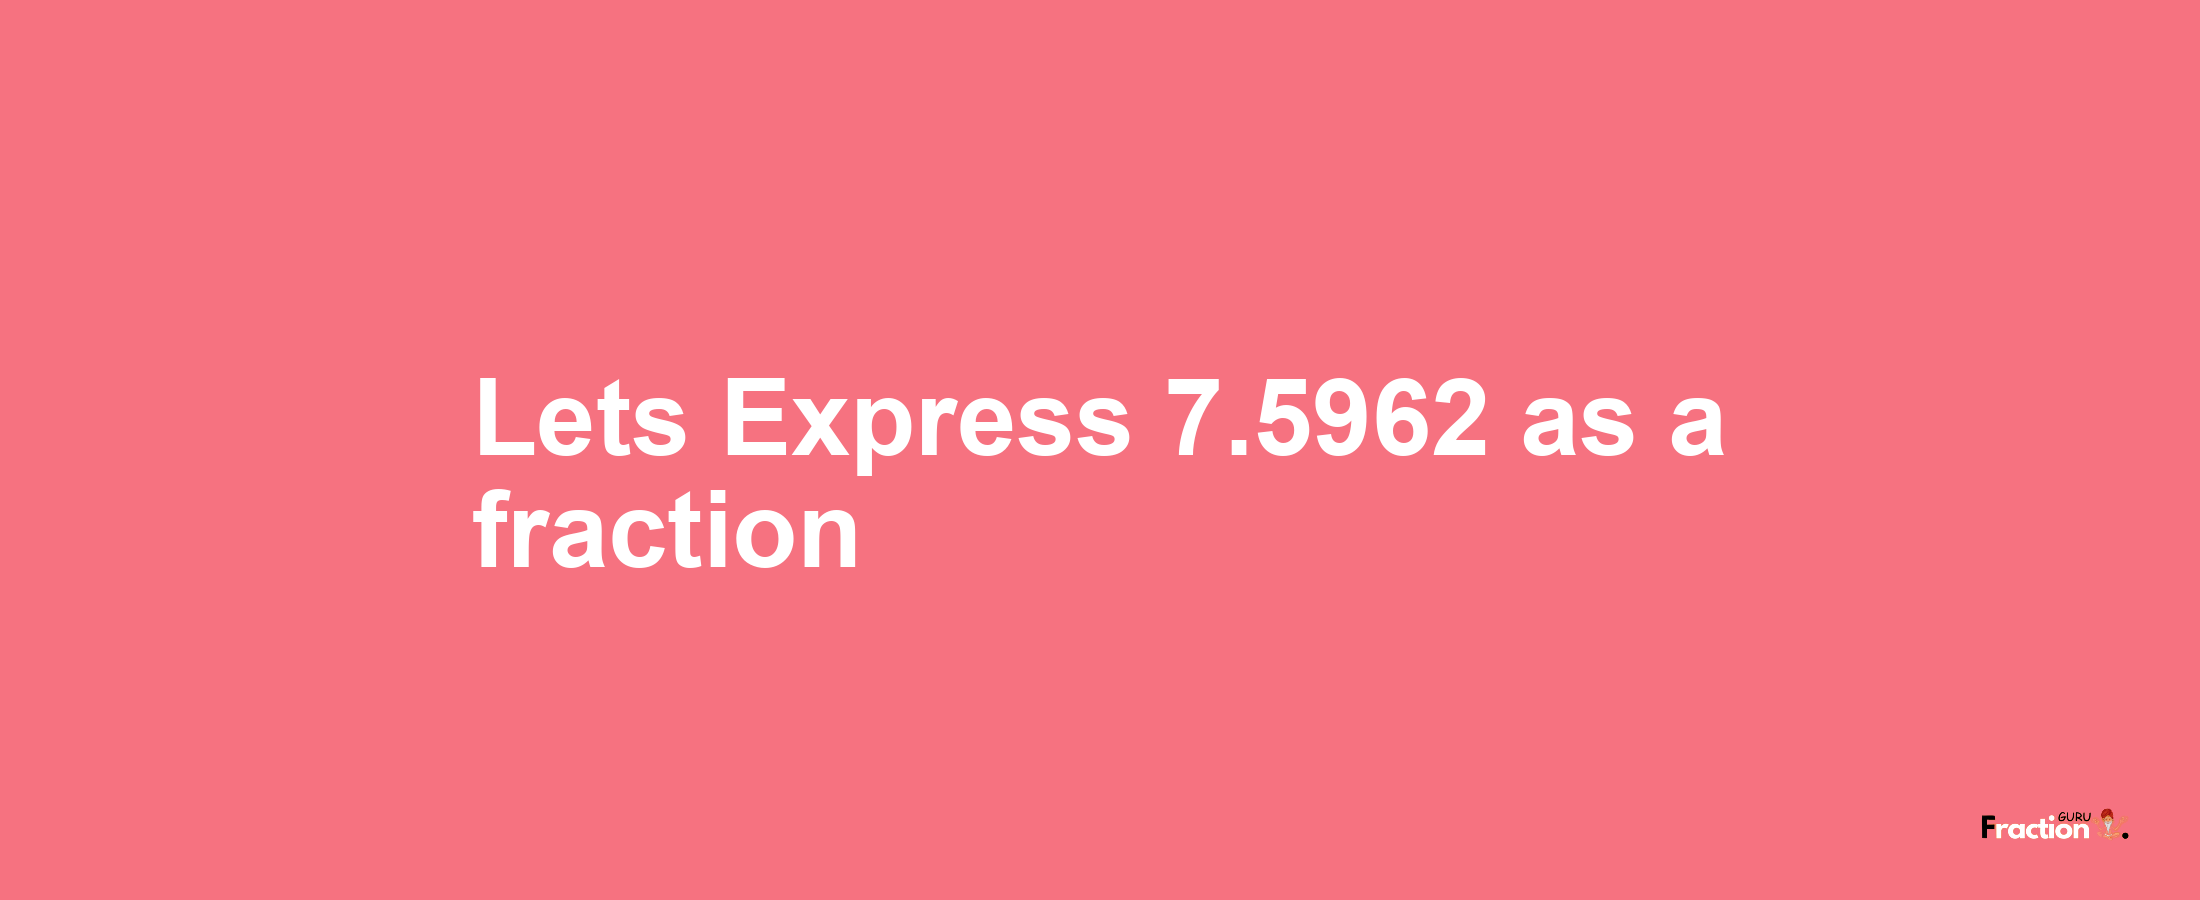 Lets Express 7.5962 as afraction